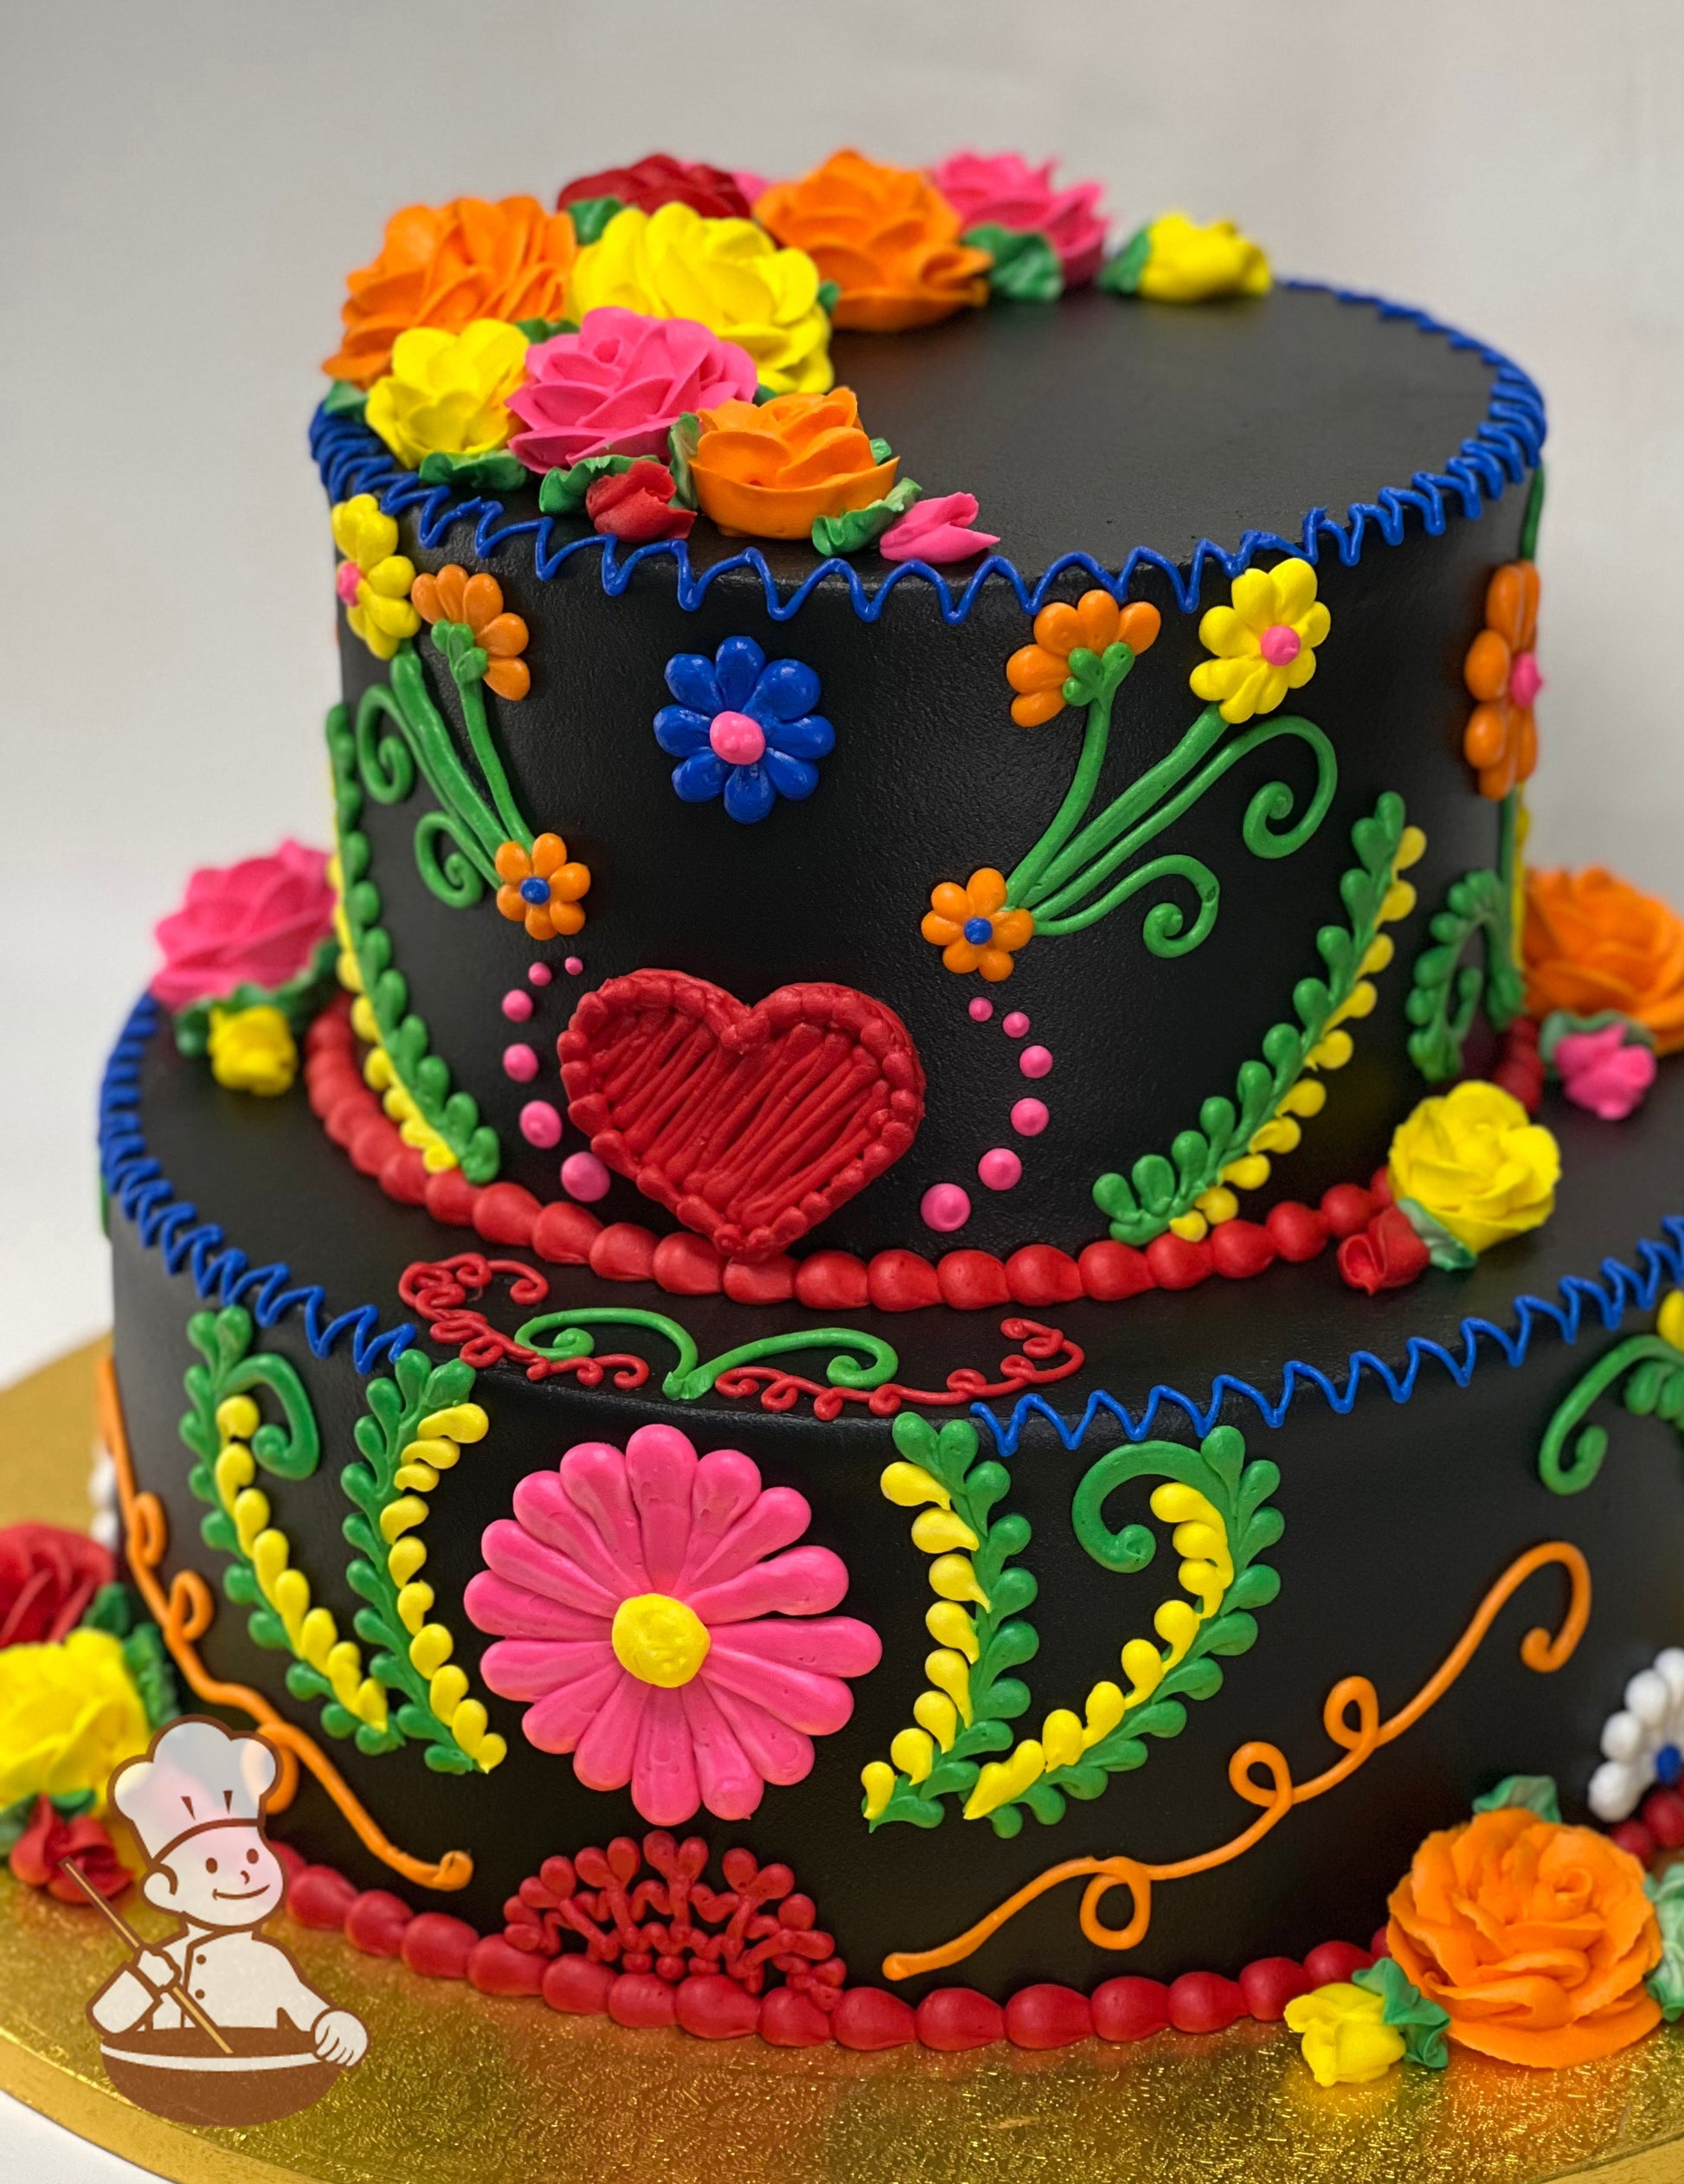 2-tier cake with black icing and decorated with buttercream piping's in bright pink, orange, red, yellow and green for a Mexican Fiesta theme.